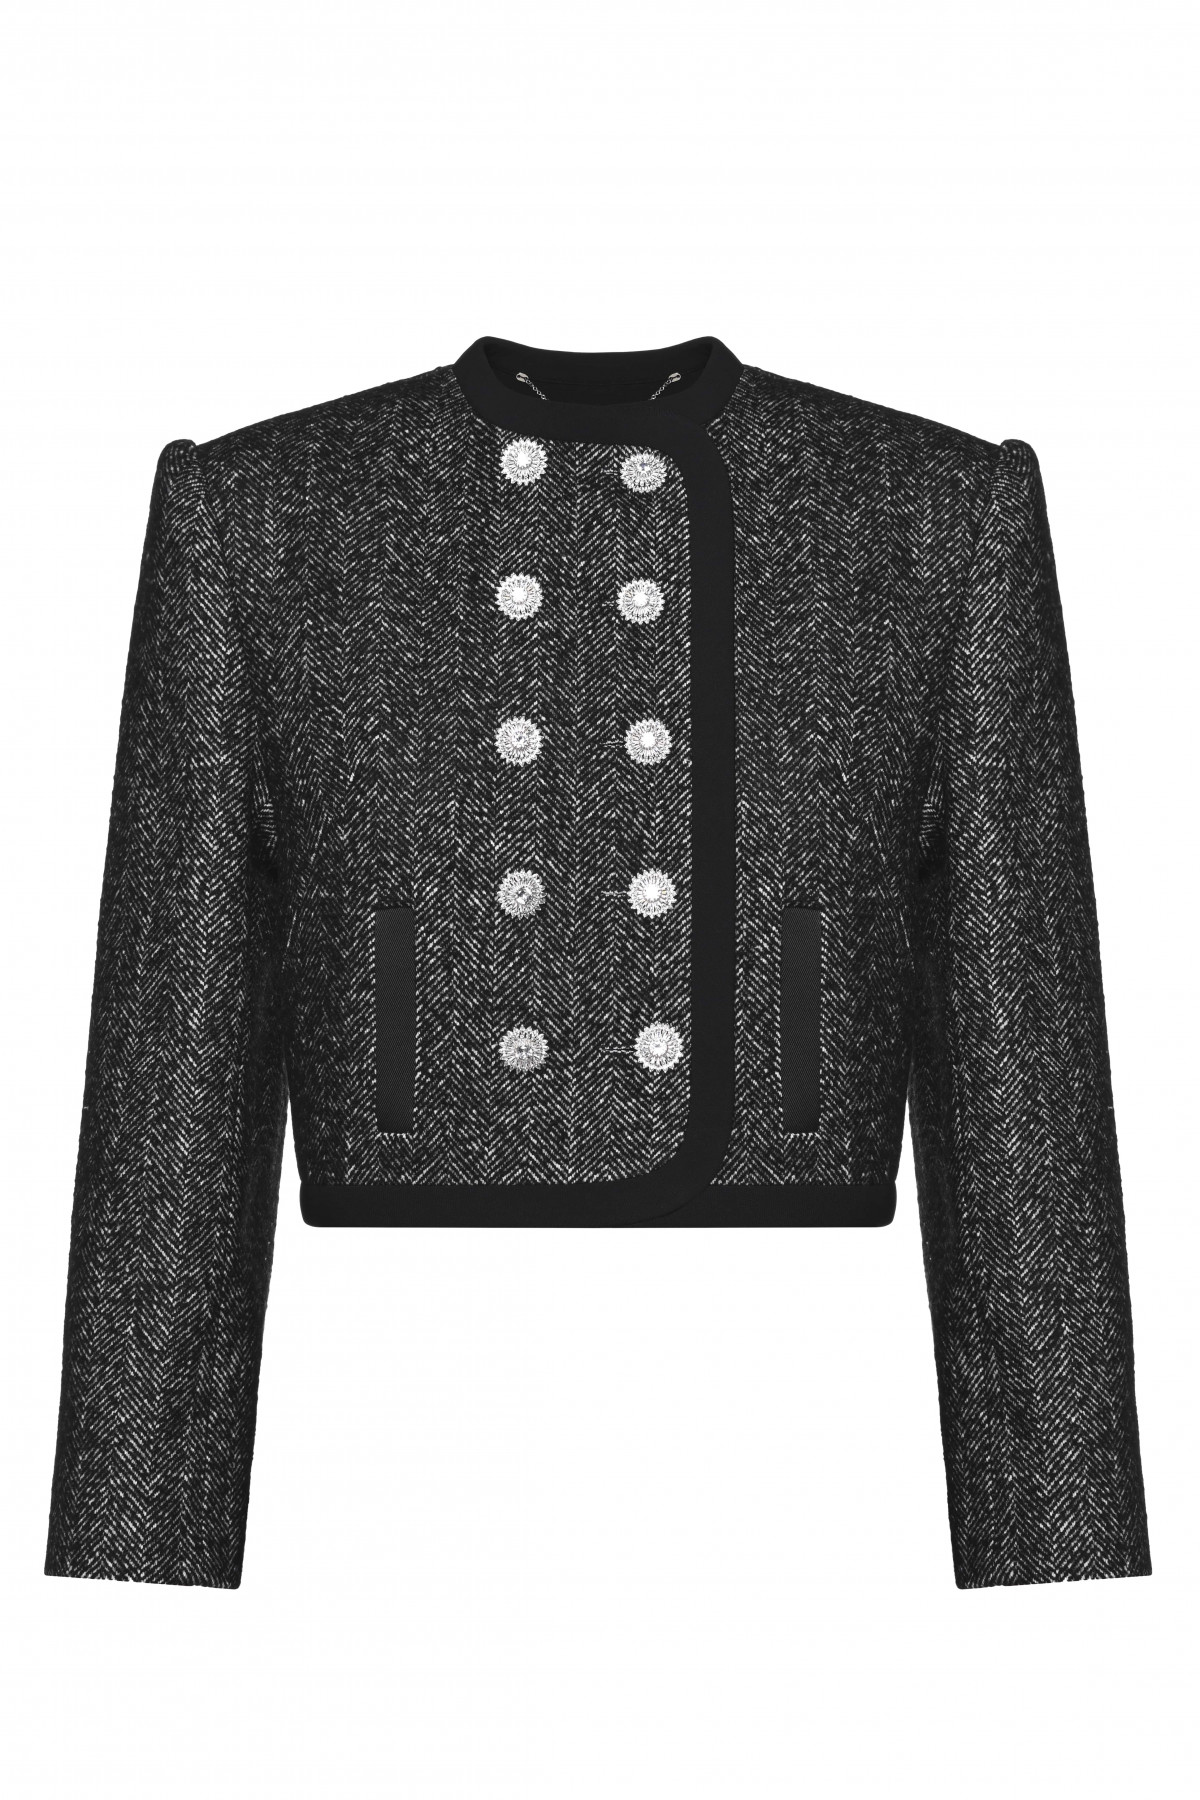 GEORGE KEBURIA - CRYSTAL-BUTTON JACKET